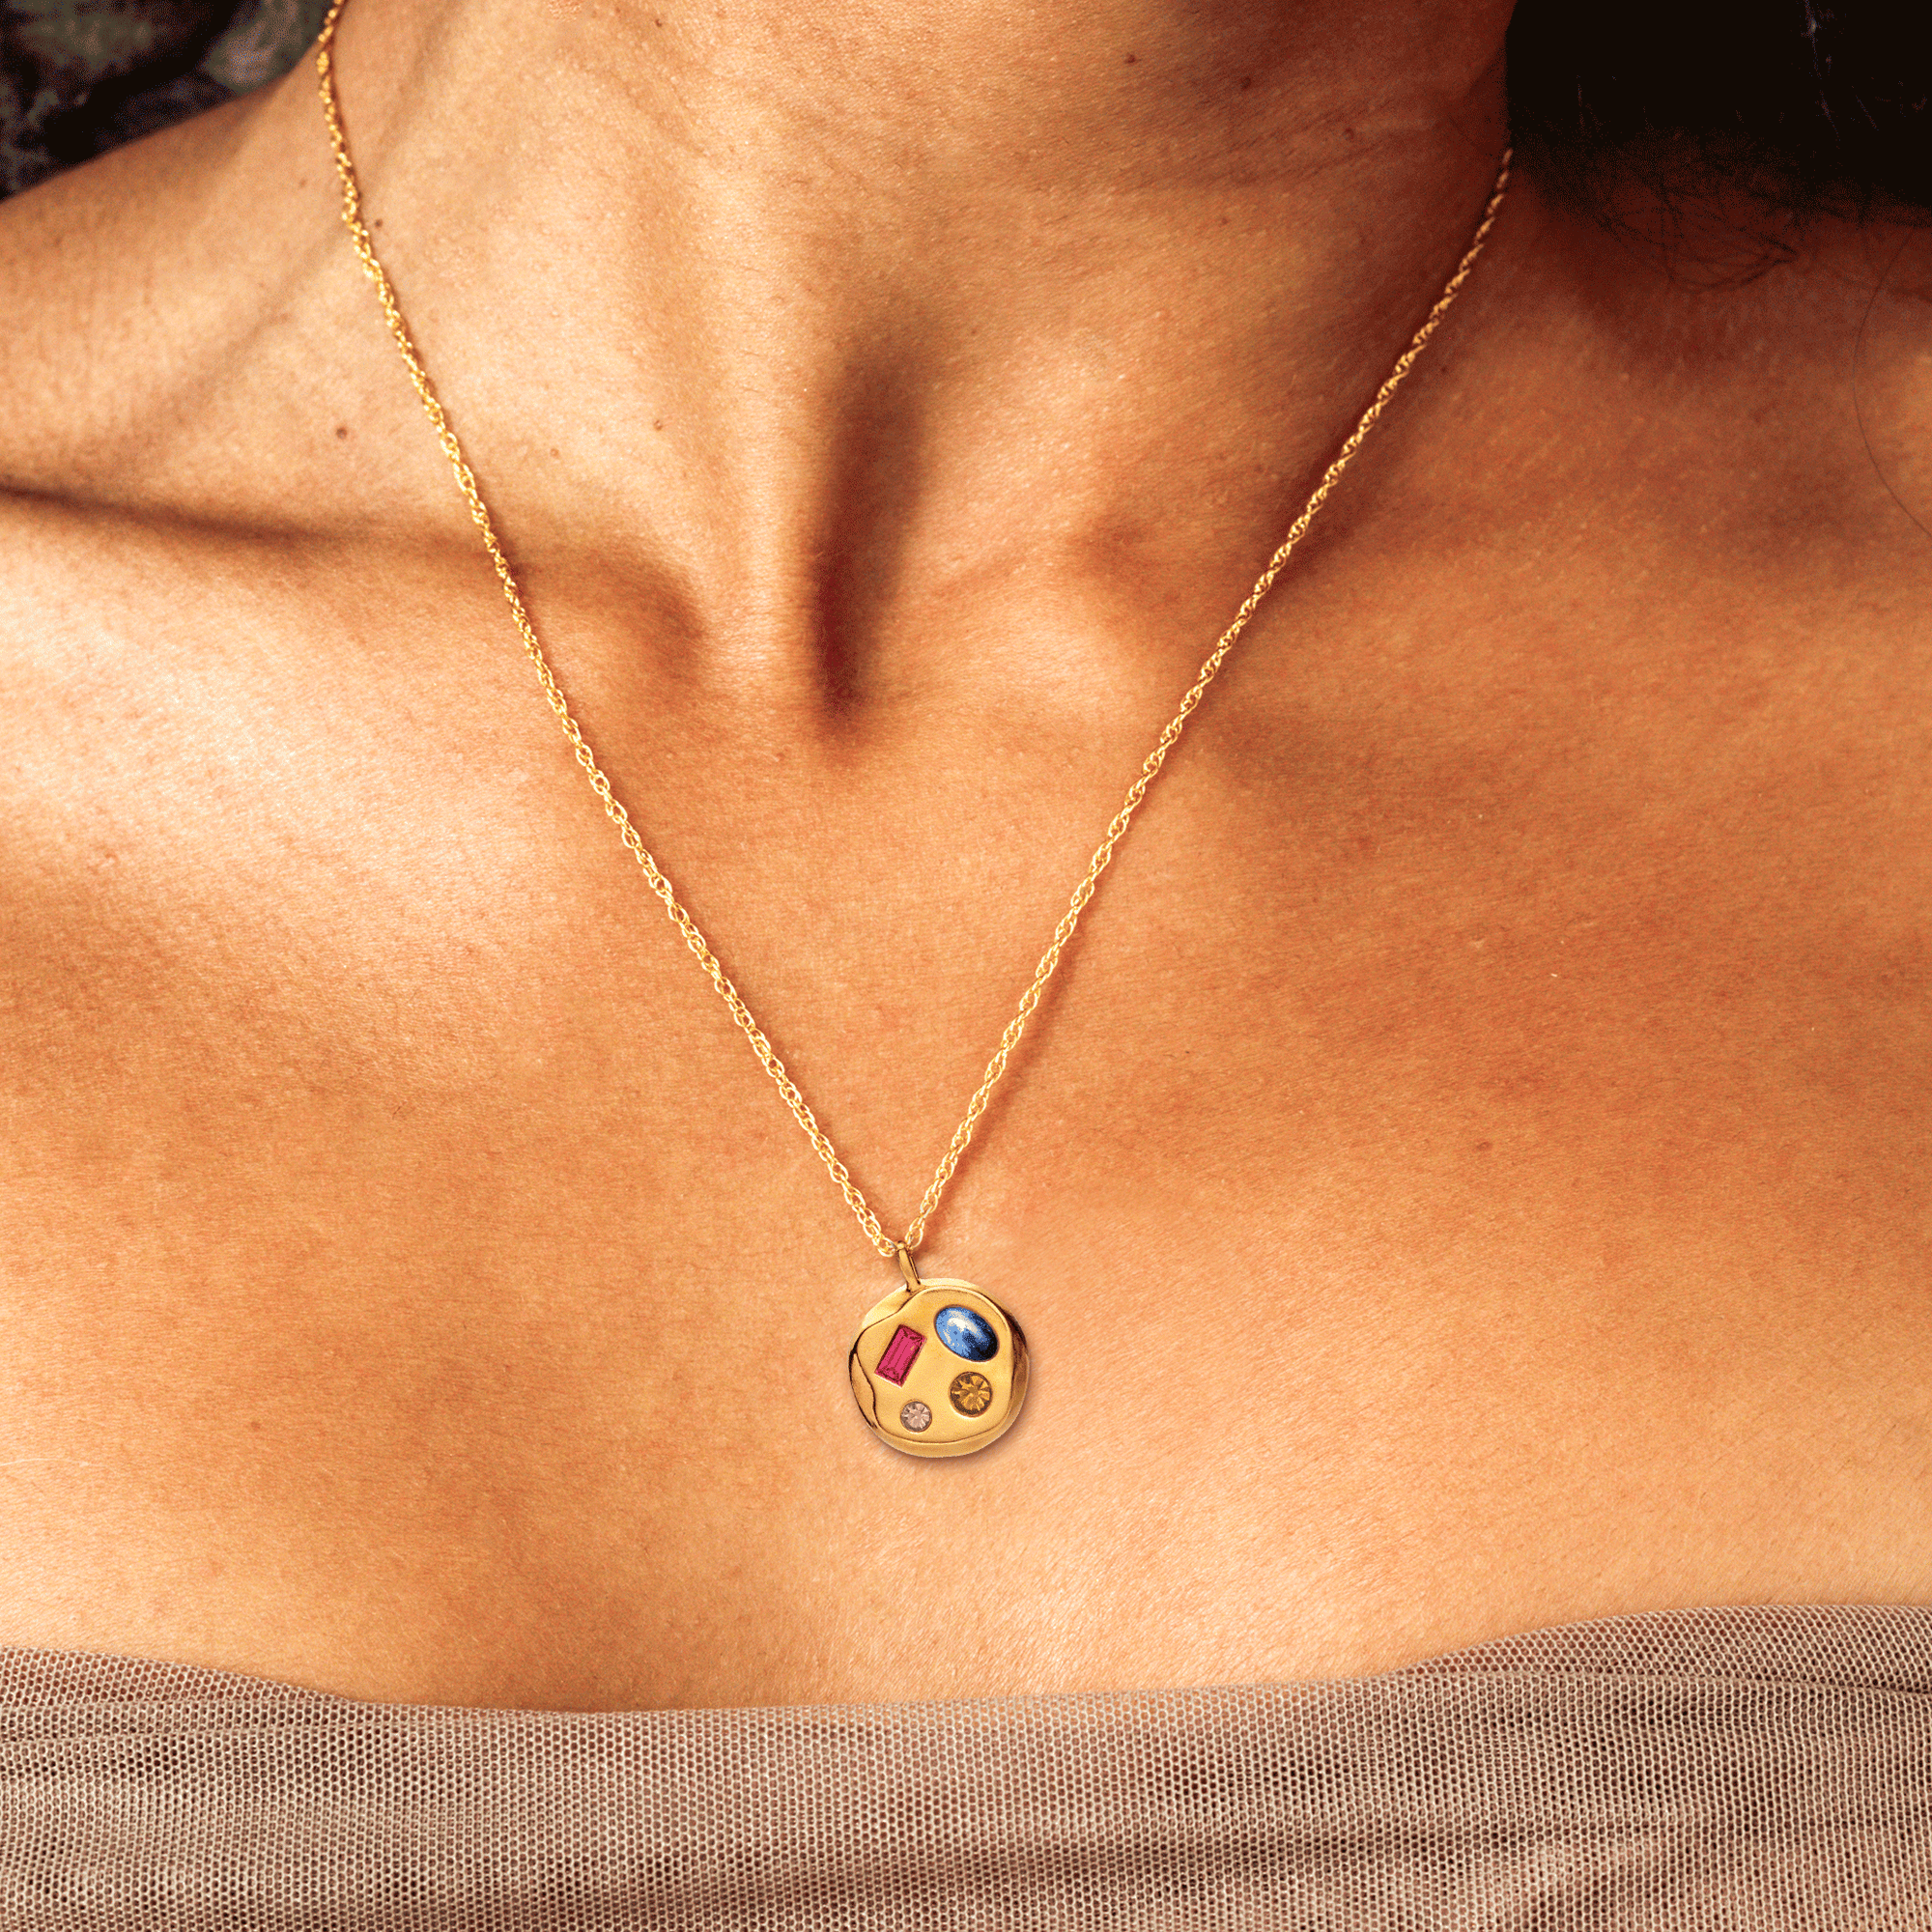 Person wearing The July Sixth Pendant